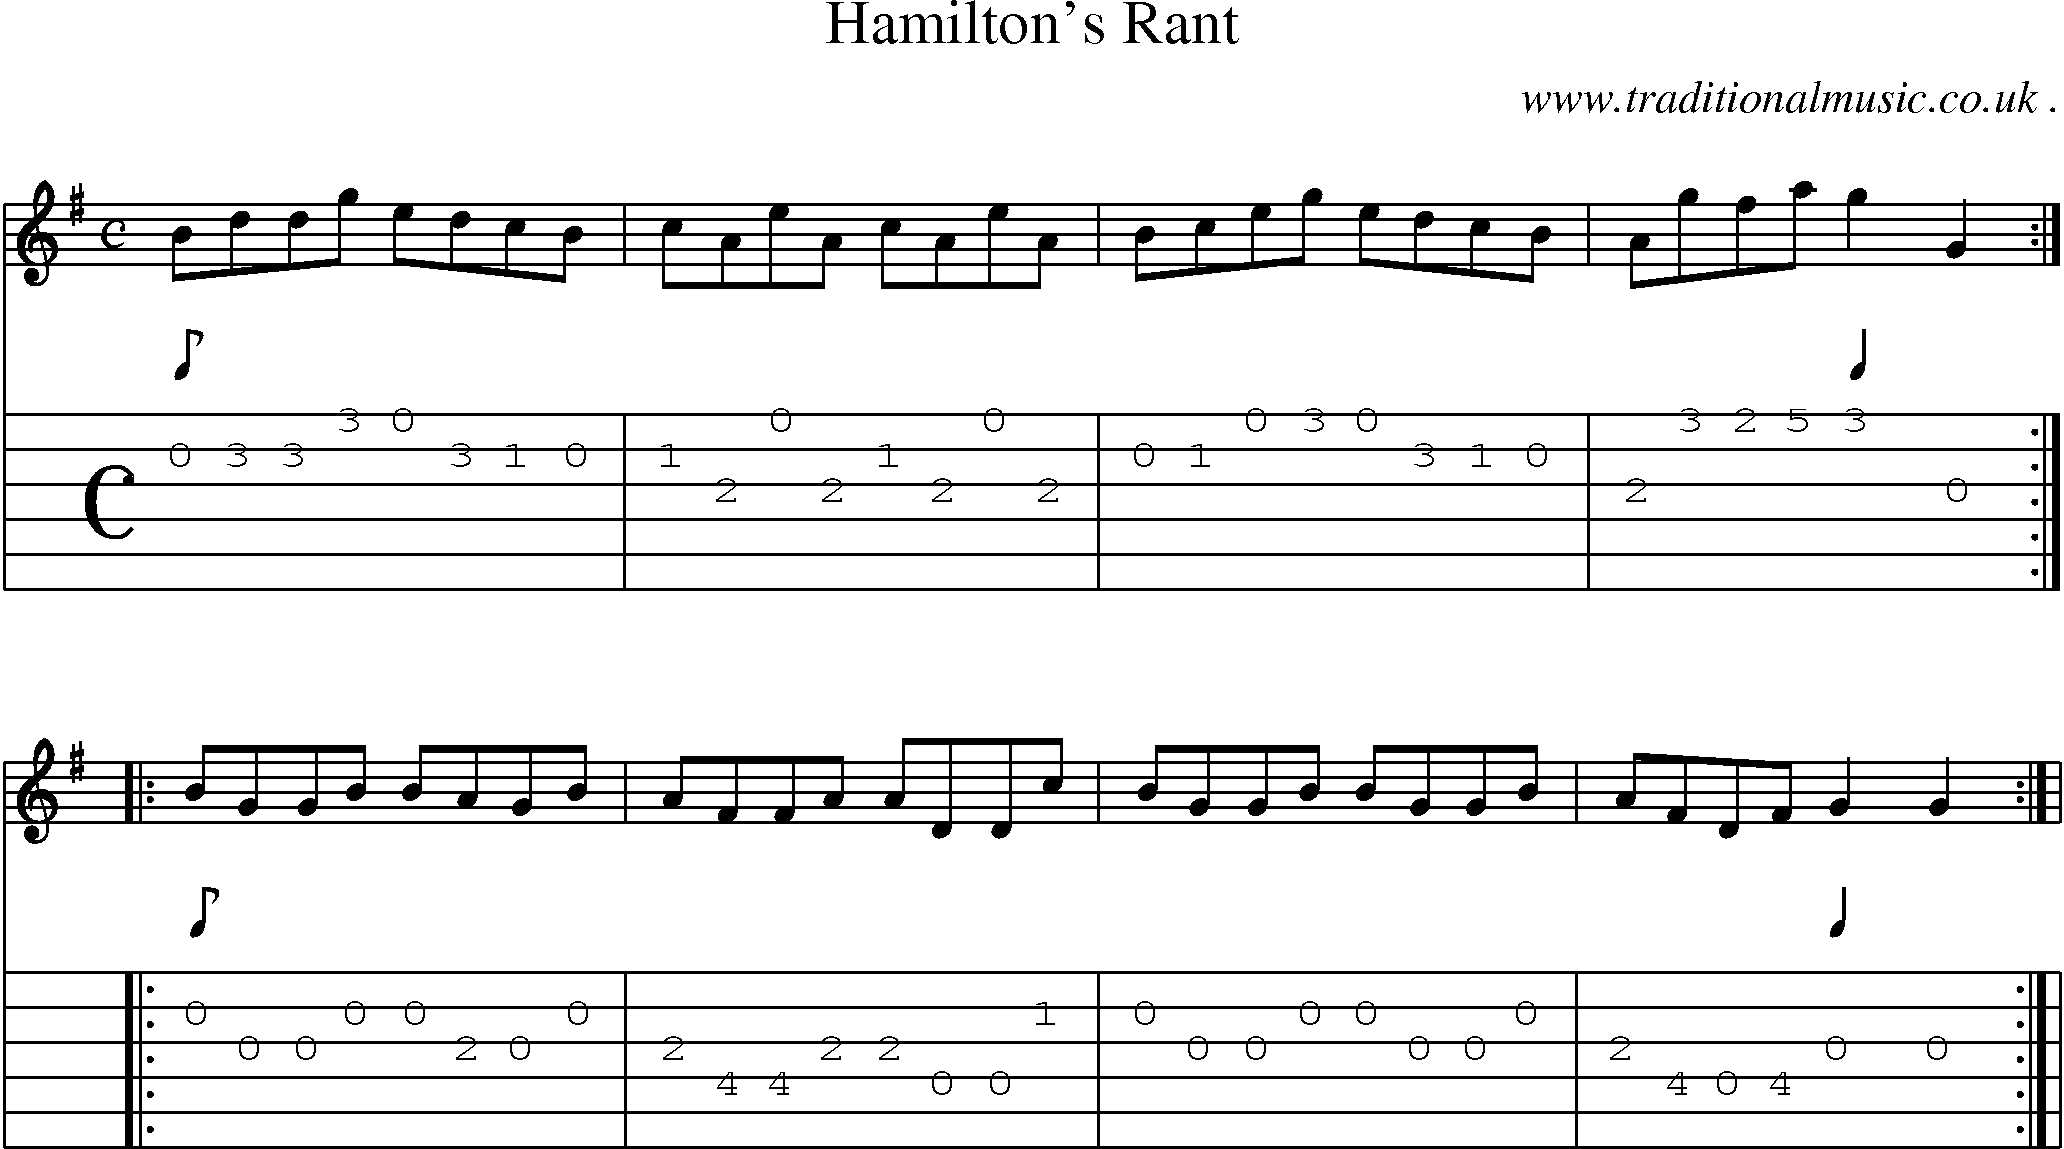 Sheet-Music and Guitar Tabs for Hamiltons Rant